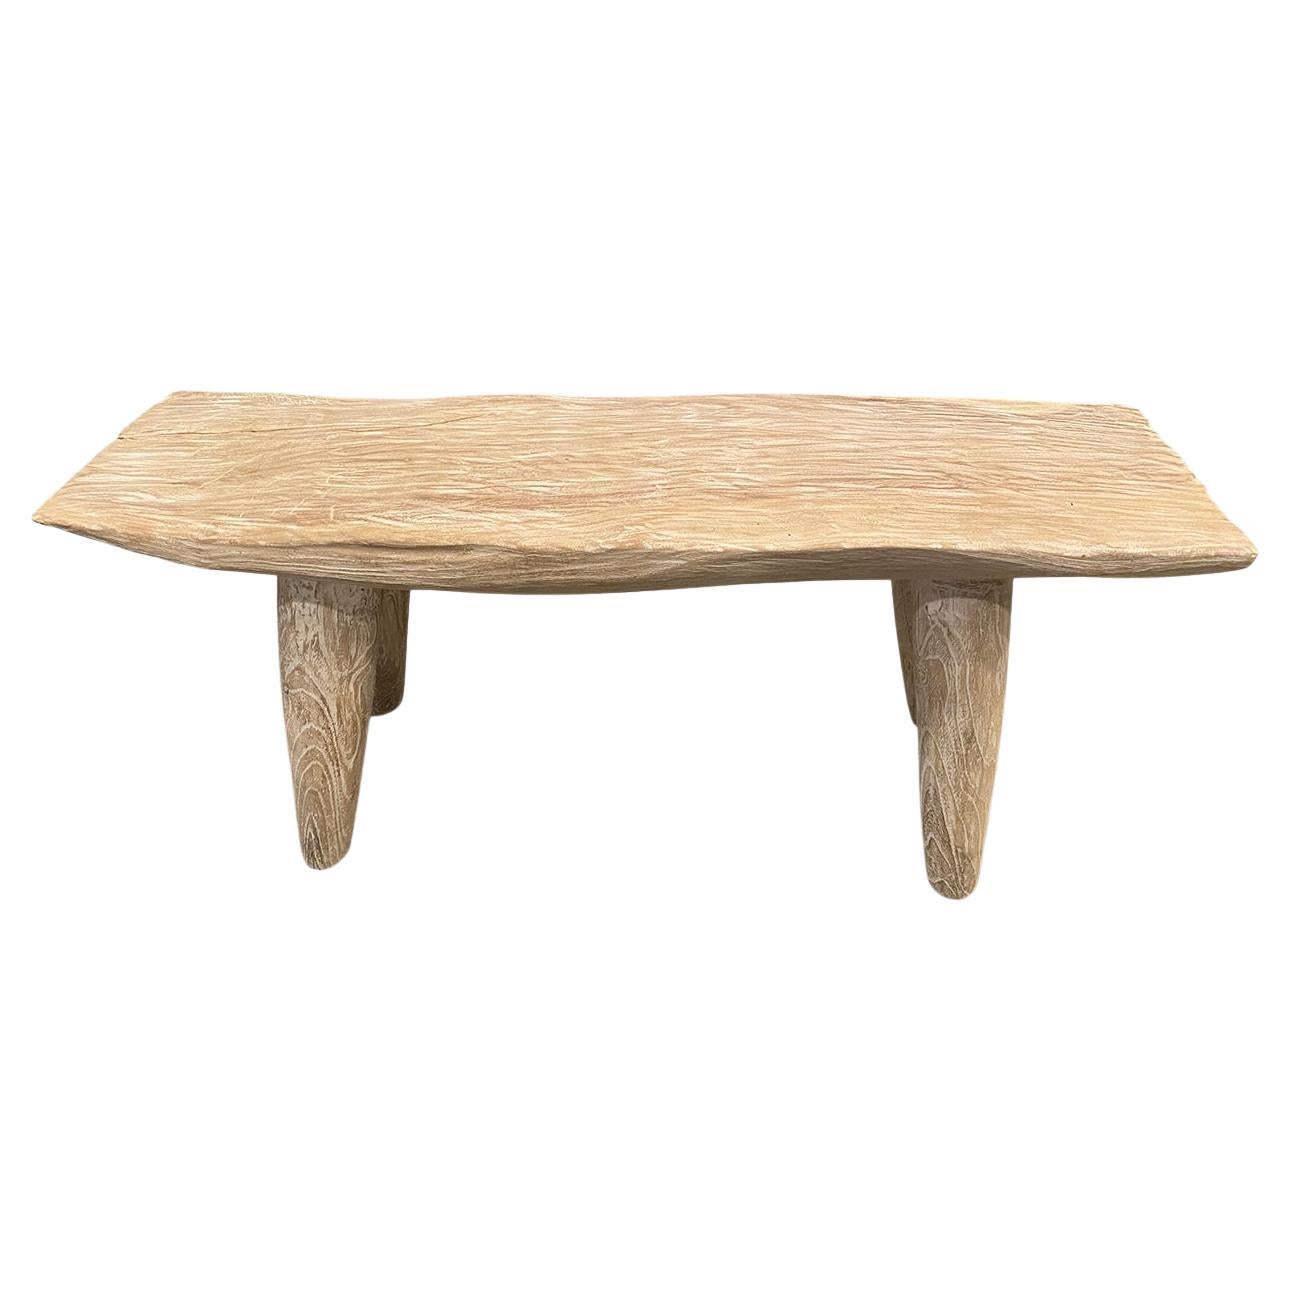 Andrianna Shamaris St. Barts Bleached Teak Wood Bench For Sale